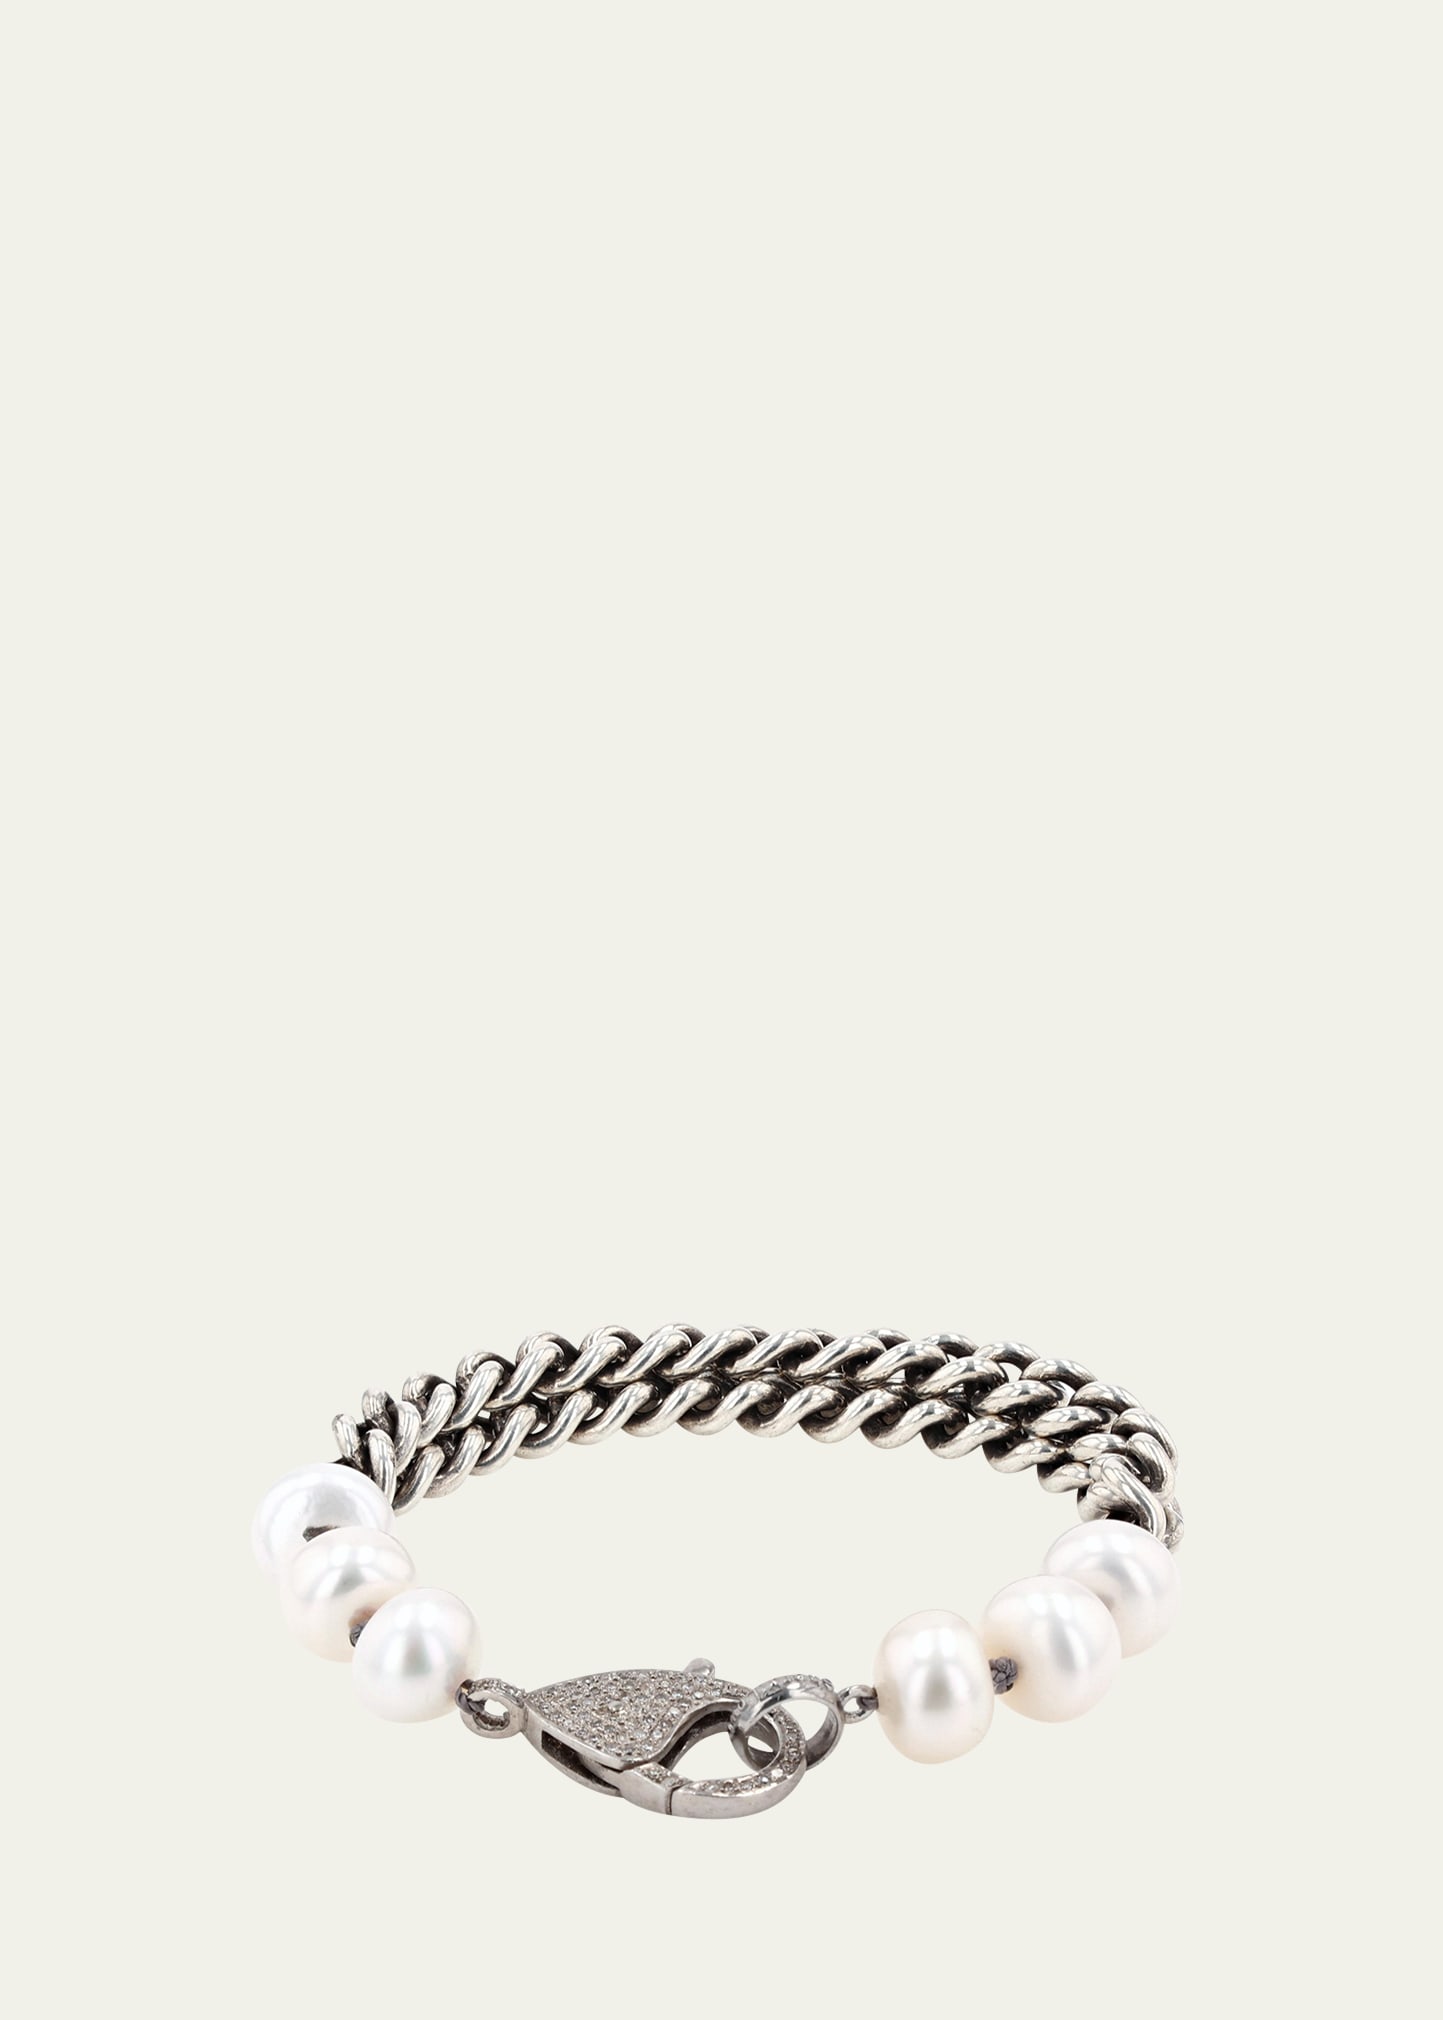 SHERYL LOWE PEARL AND DOUBLE CHAIN BRACELET WITH PAVE DIAMOND CLASP